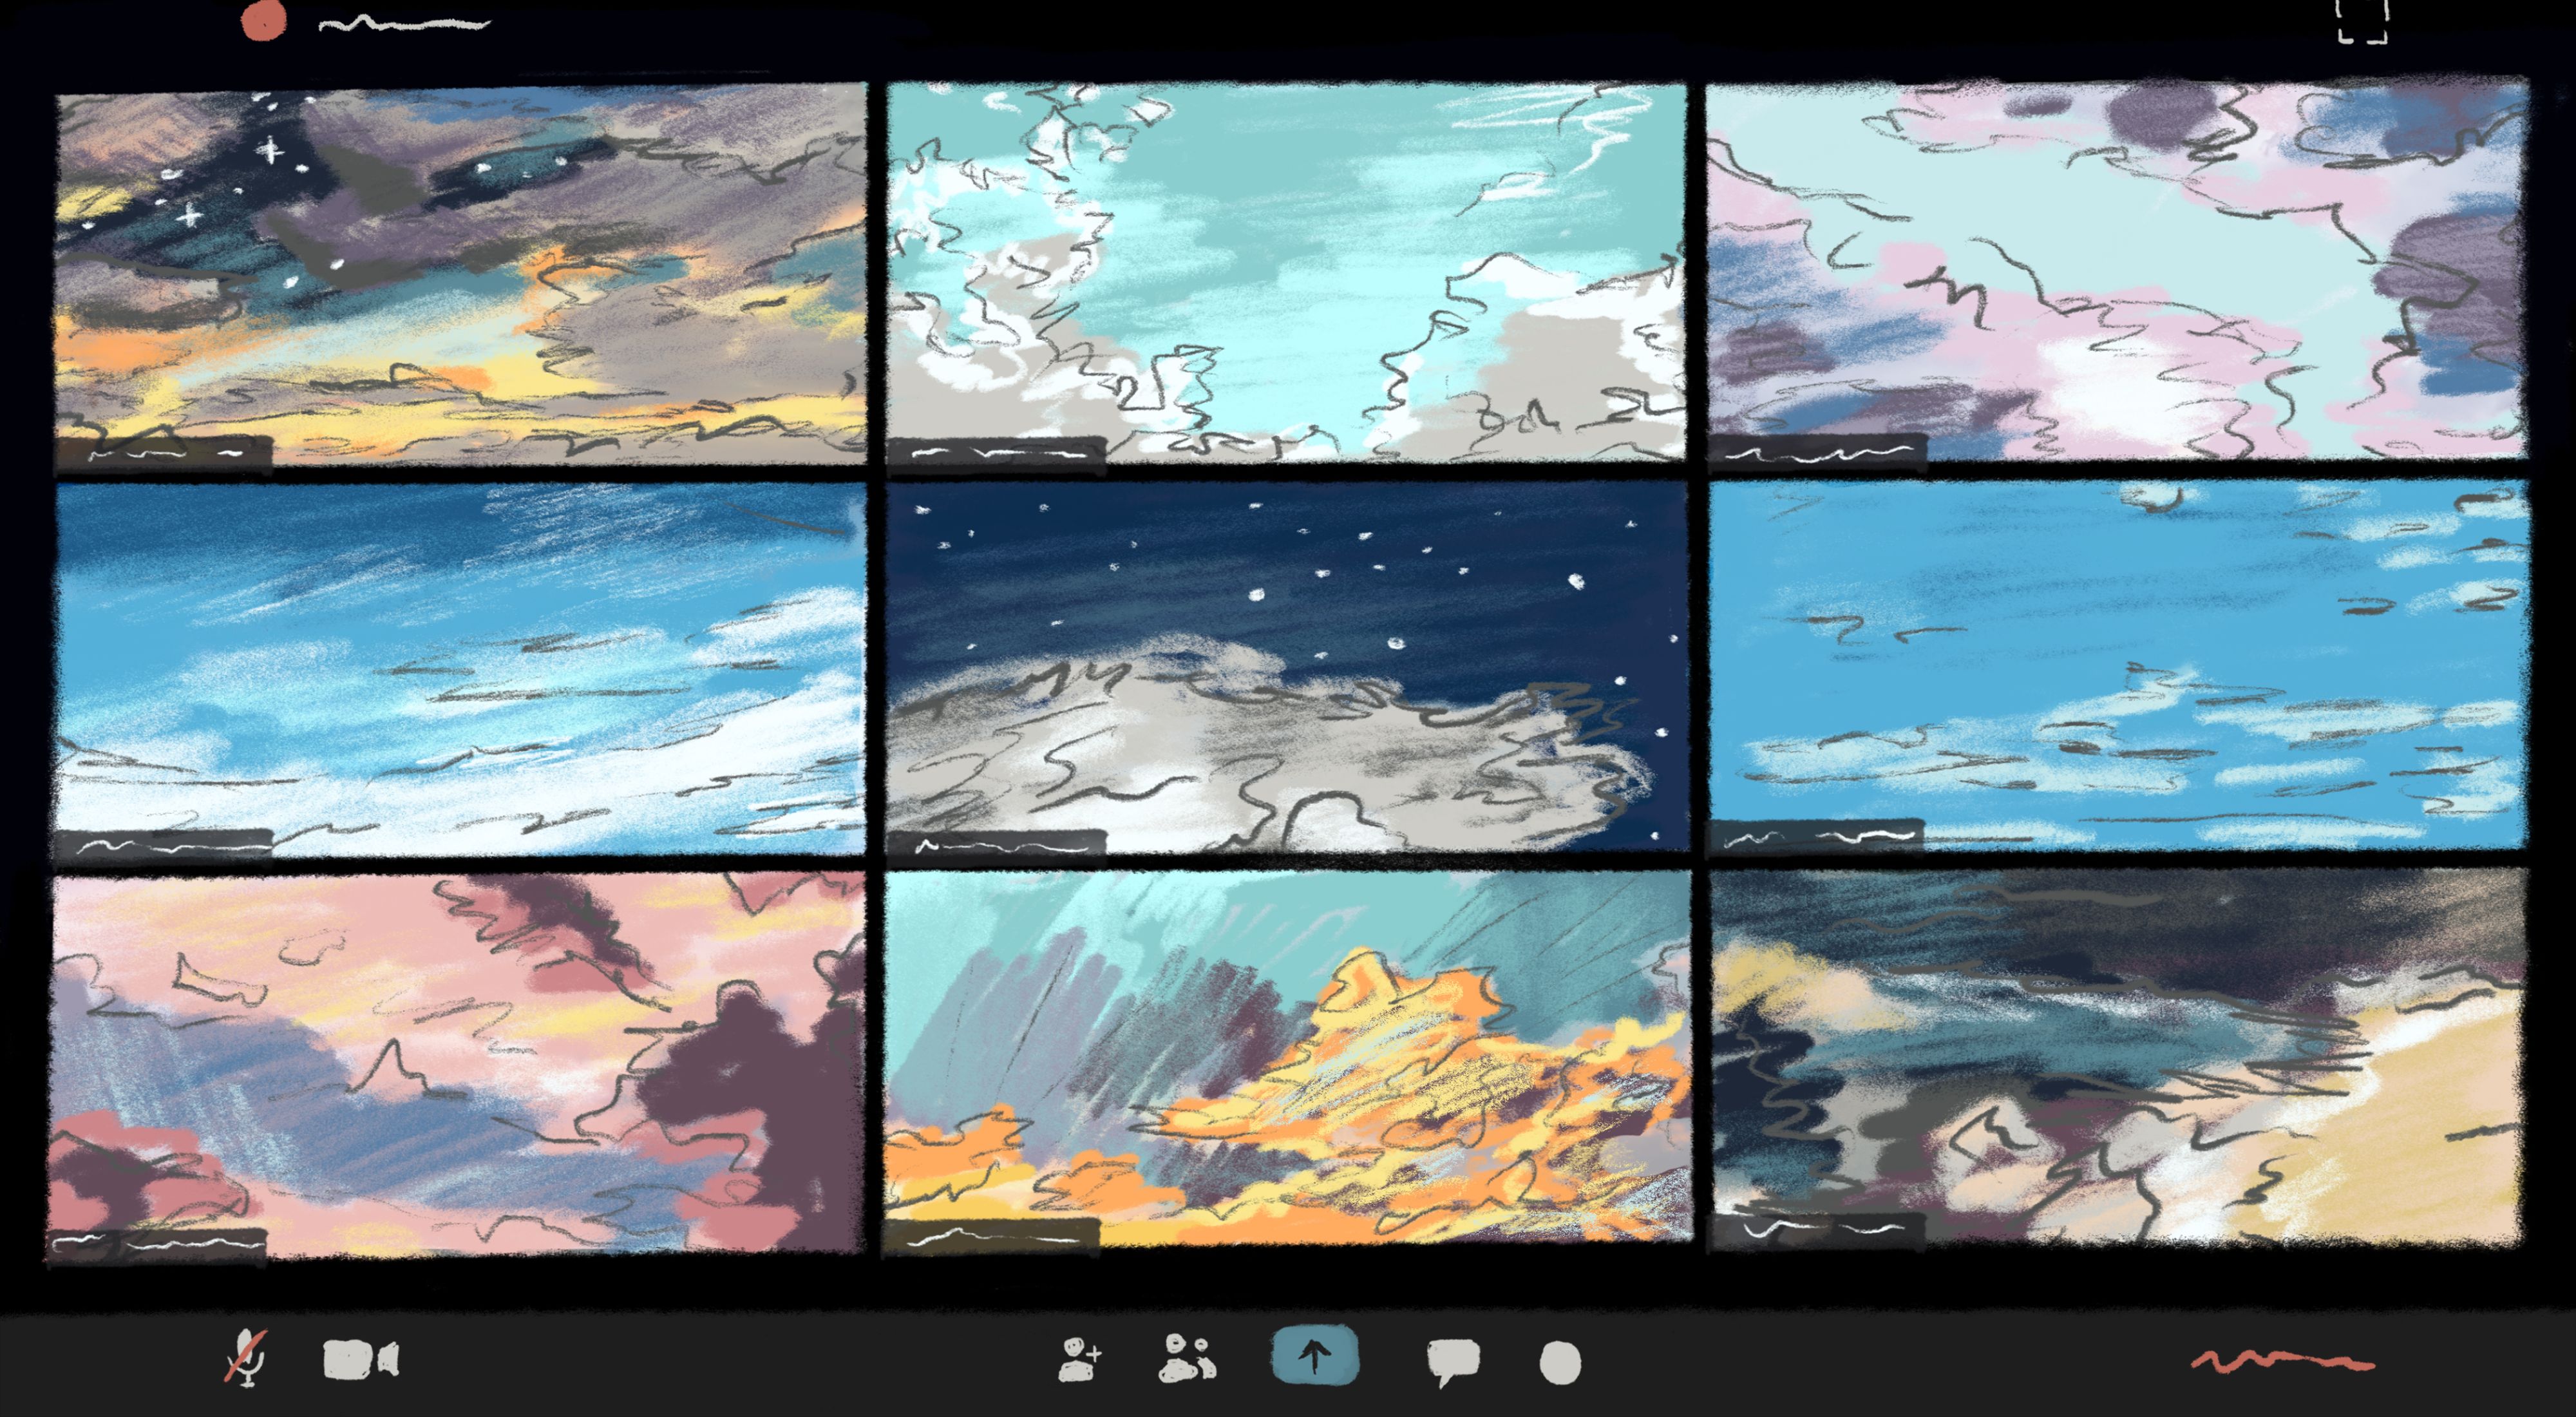 An illustration of a video chat interface with different sky scenes in the video frames against a black background.